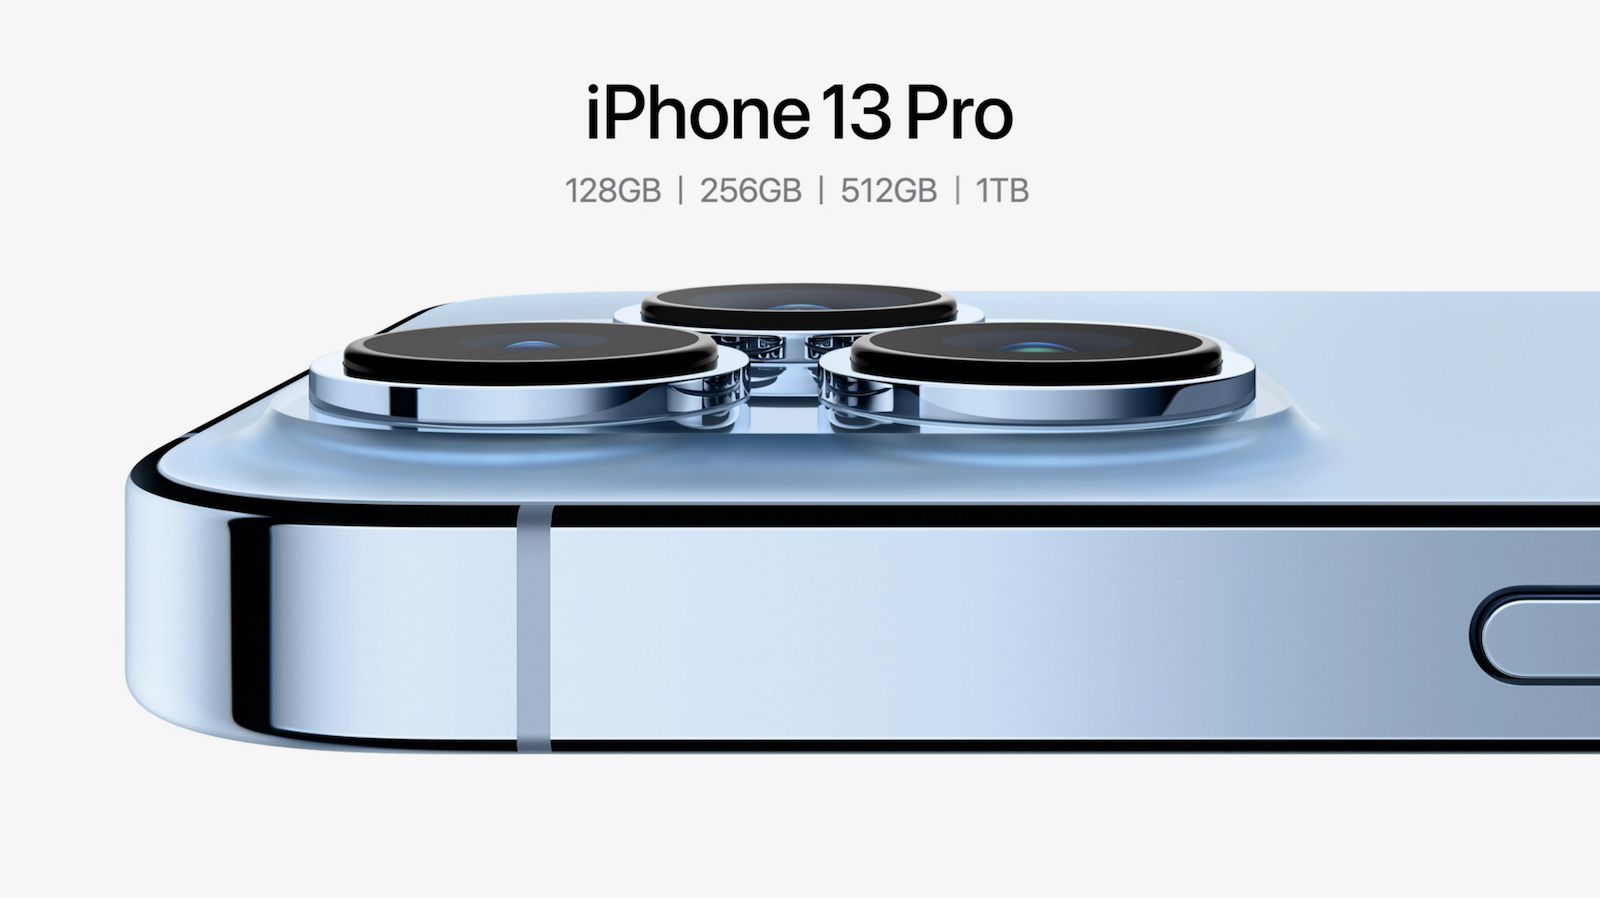 iPhone 13 Pro Available With Up to 1TB of Storage, Pricing Tops